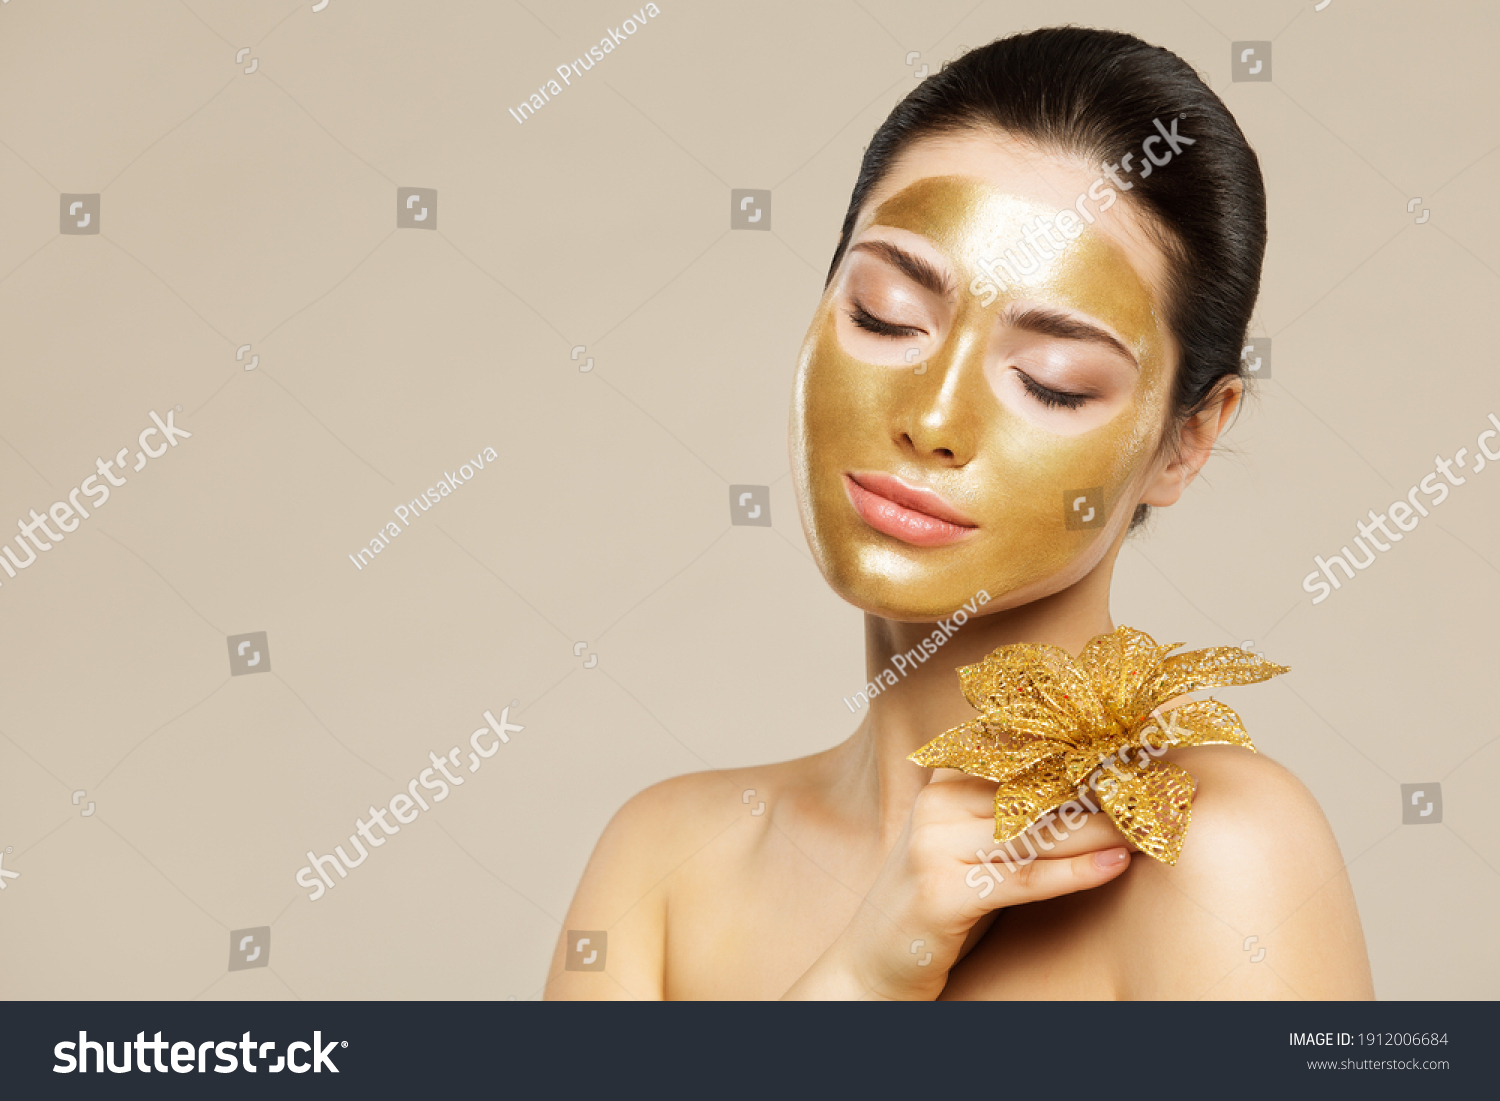 Facial peeling Golden Mask. Gold Lifting Anti Wrinkle Aging Face Mask. Perfect Smooth Skin Care #1912006684